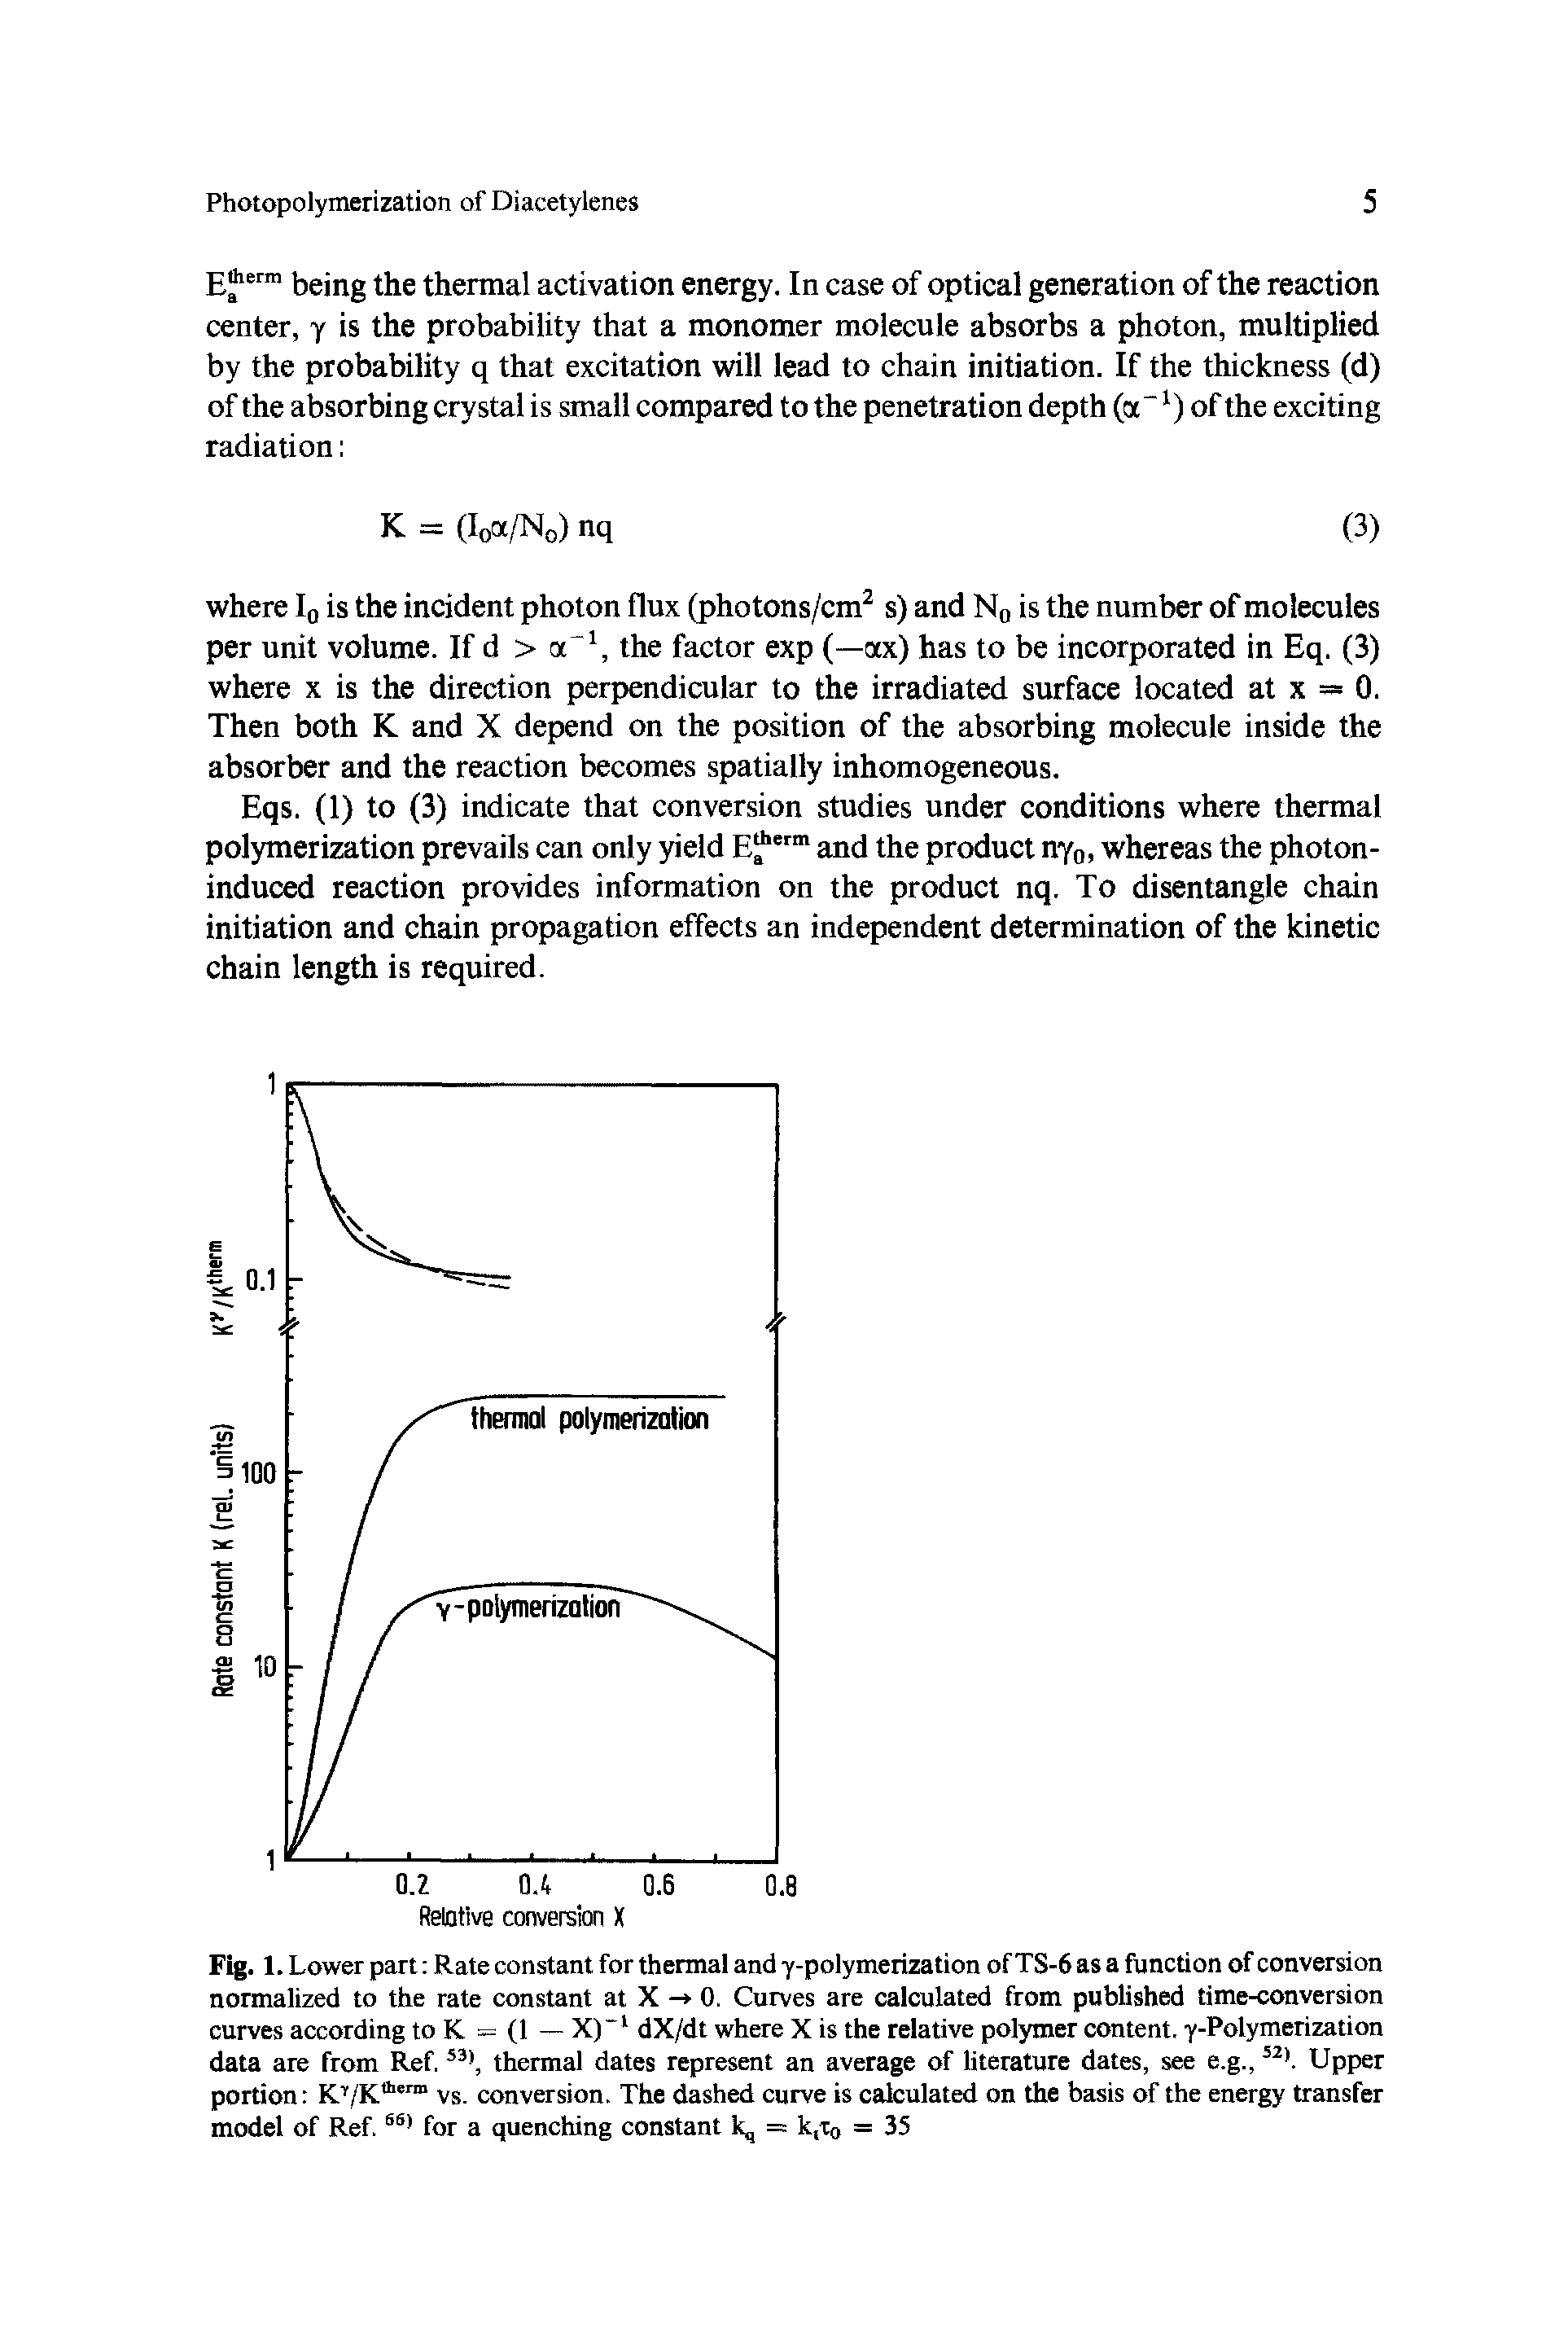 Fig. 1. Lower part Rate constant for thermal and y-polymerization of TS-6 as a function of conversion normalized to the rate constant at X - 0. Curves are calculated from published time-conversion curves according to K = (1 — X)- dX/dt where X is the relative polymer content. y-Polymerization data are from Ref. thermal dates represent an average of literature dates, see e.g., Upper portion vs. conversion. The dashed curve is calculated on the basis of the energy transfer...